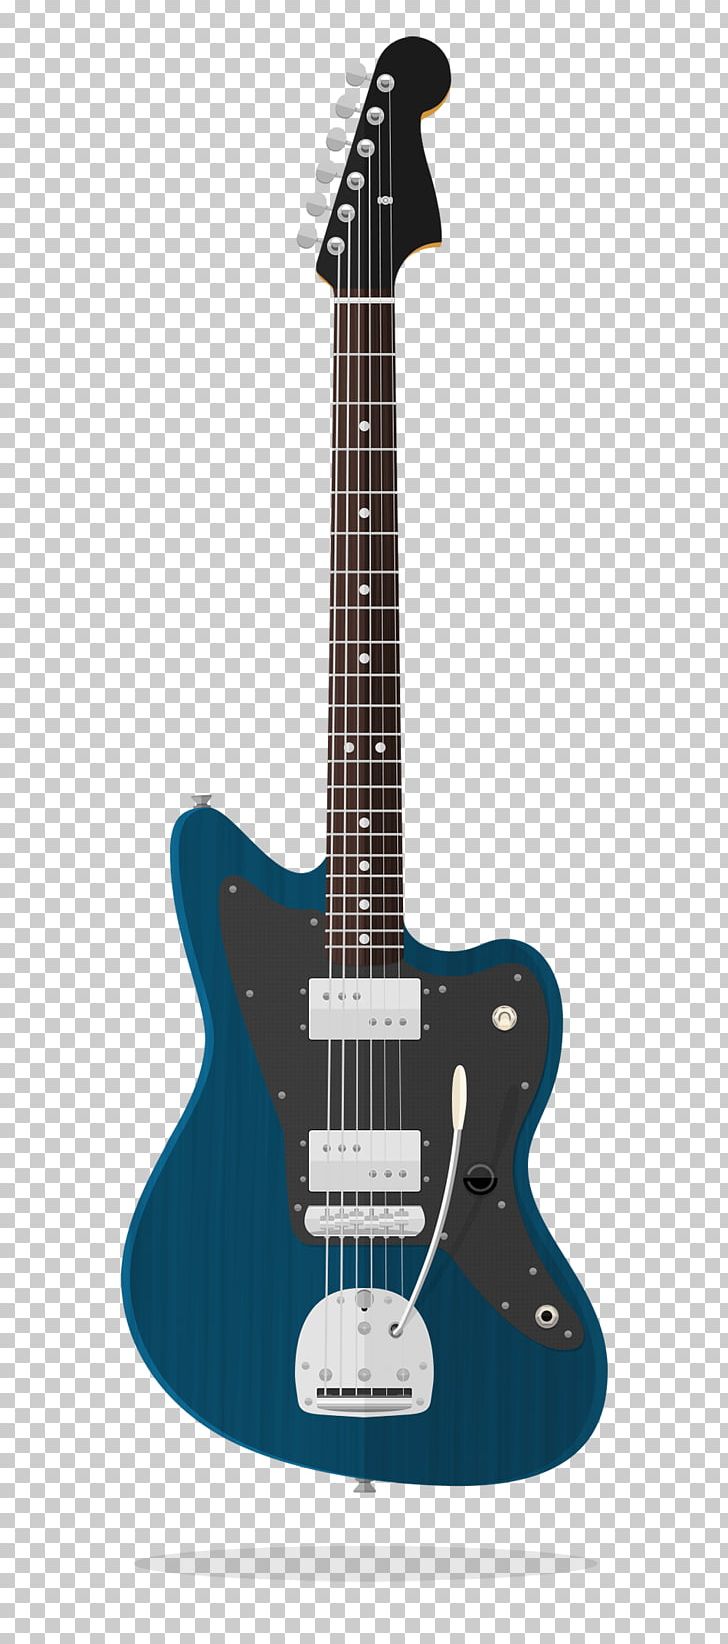 Electric Guitar Fender Jazzmaster Fender California Series Fender Stratocaster Acoustic Guitar PNG, Clipart, Acoustic Electric Guitar, Acoustic Guitar, Cutaway, Fight, Guitar Accessory Free PNG Download